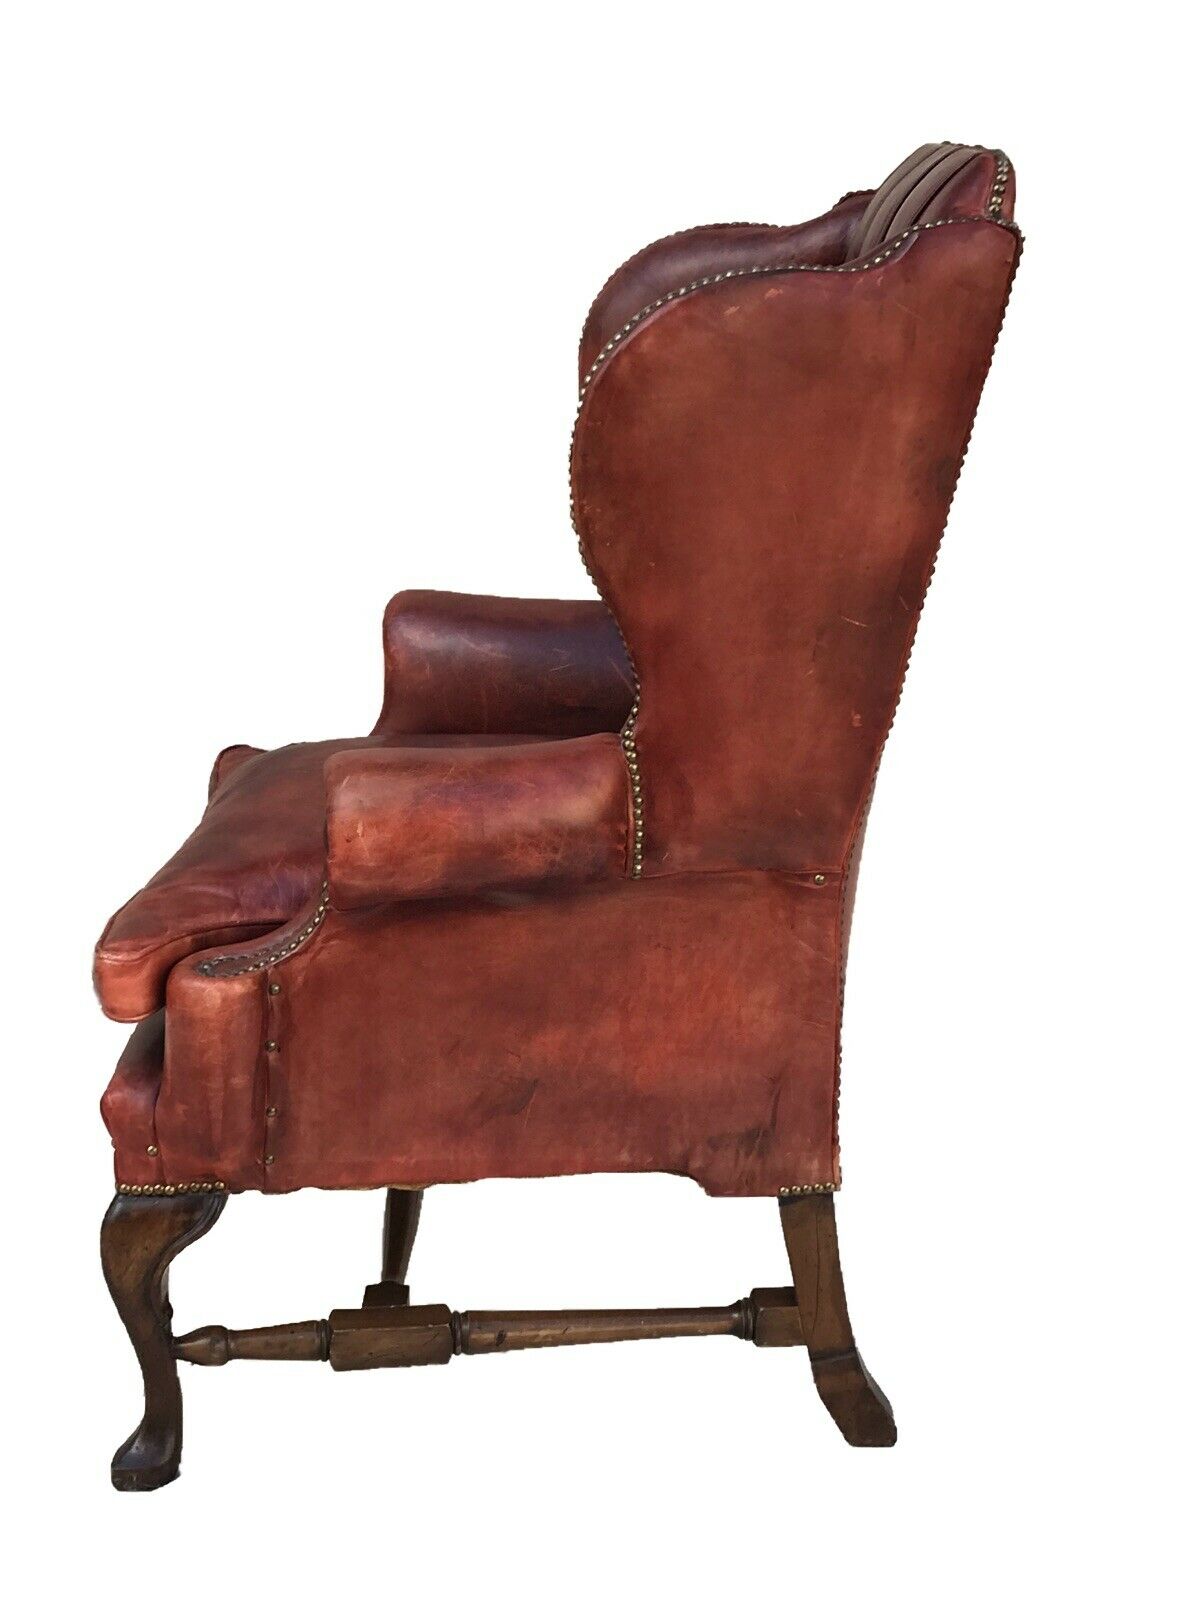 EARLY 20TH C ANTIQUE STYLE OX BLOOD RED TUFTED LEATHER LIBRARY ARM CHAIR